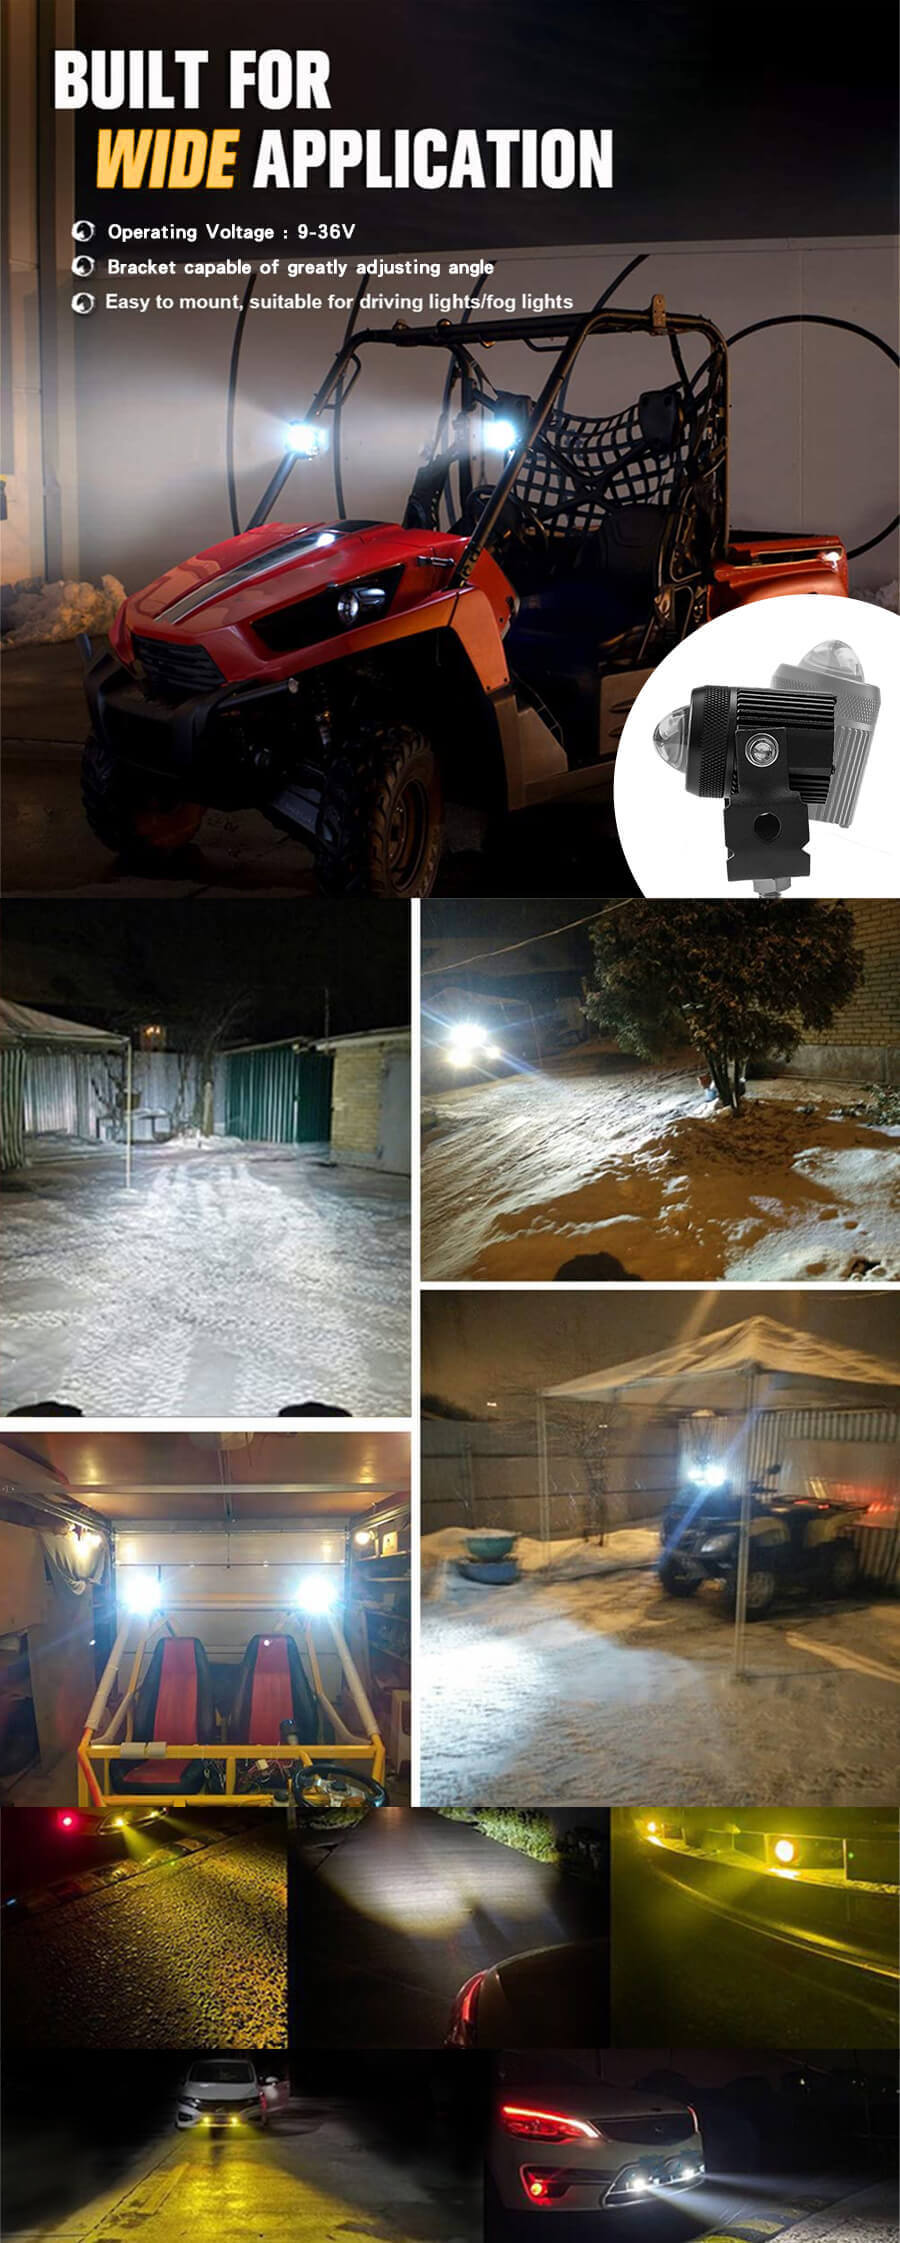 External-Dual-Colors-Big-Lens-Led-Auxiliary-Light-for-Motorcycle-JG-993-application (1)